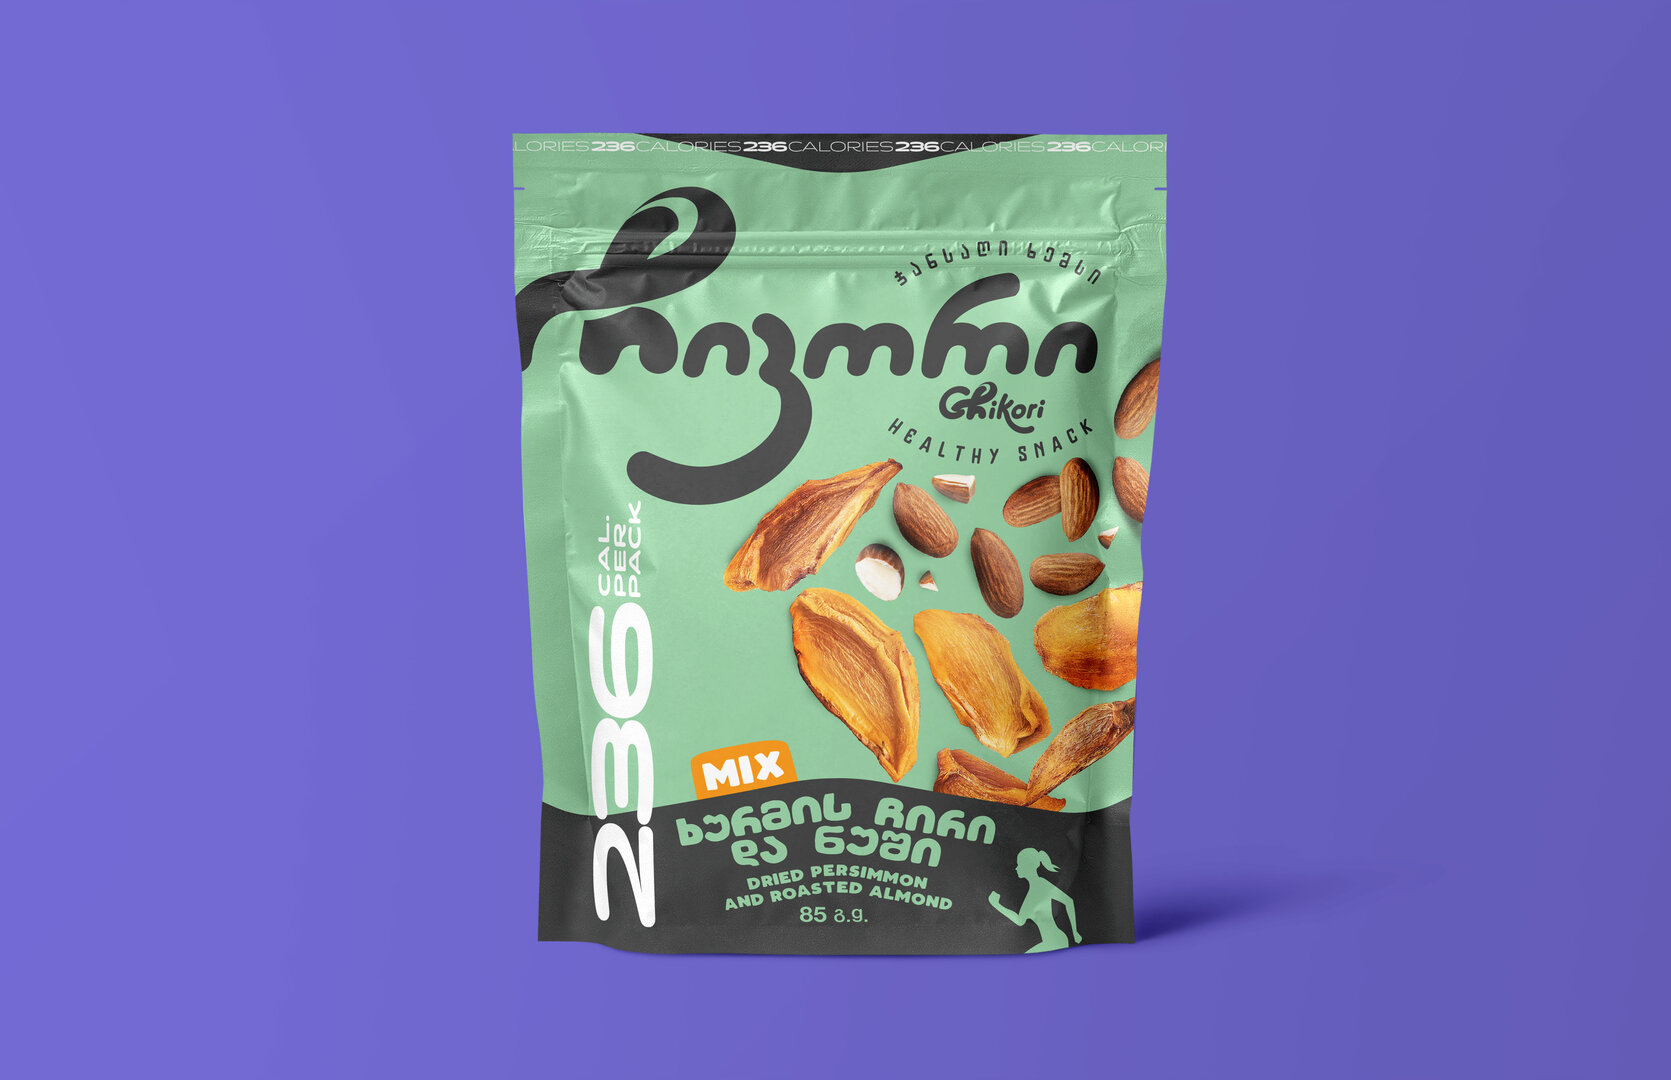 Dried Persimmon and Almonds 85g.